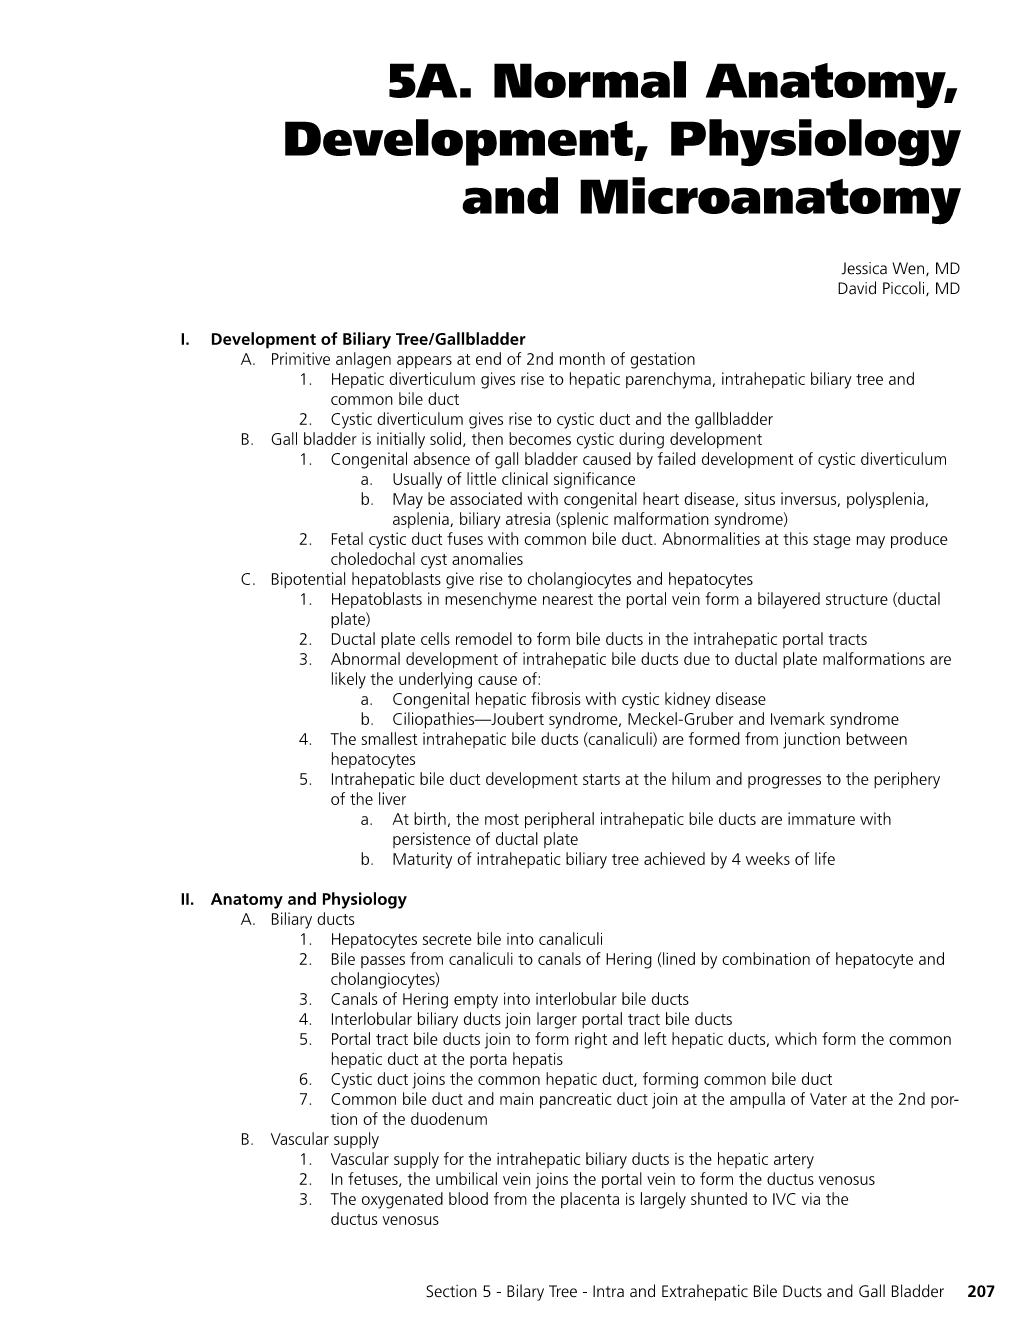 5A. Normal Anatomy, Development, Physiology and Microanatomy